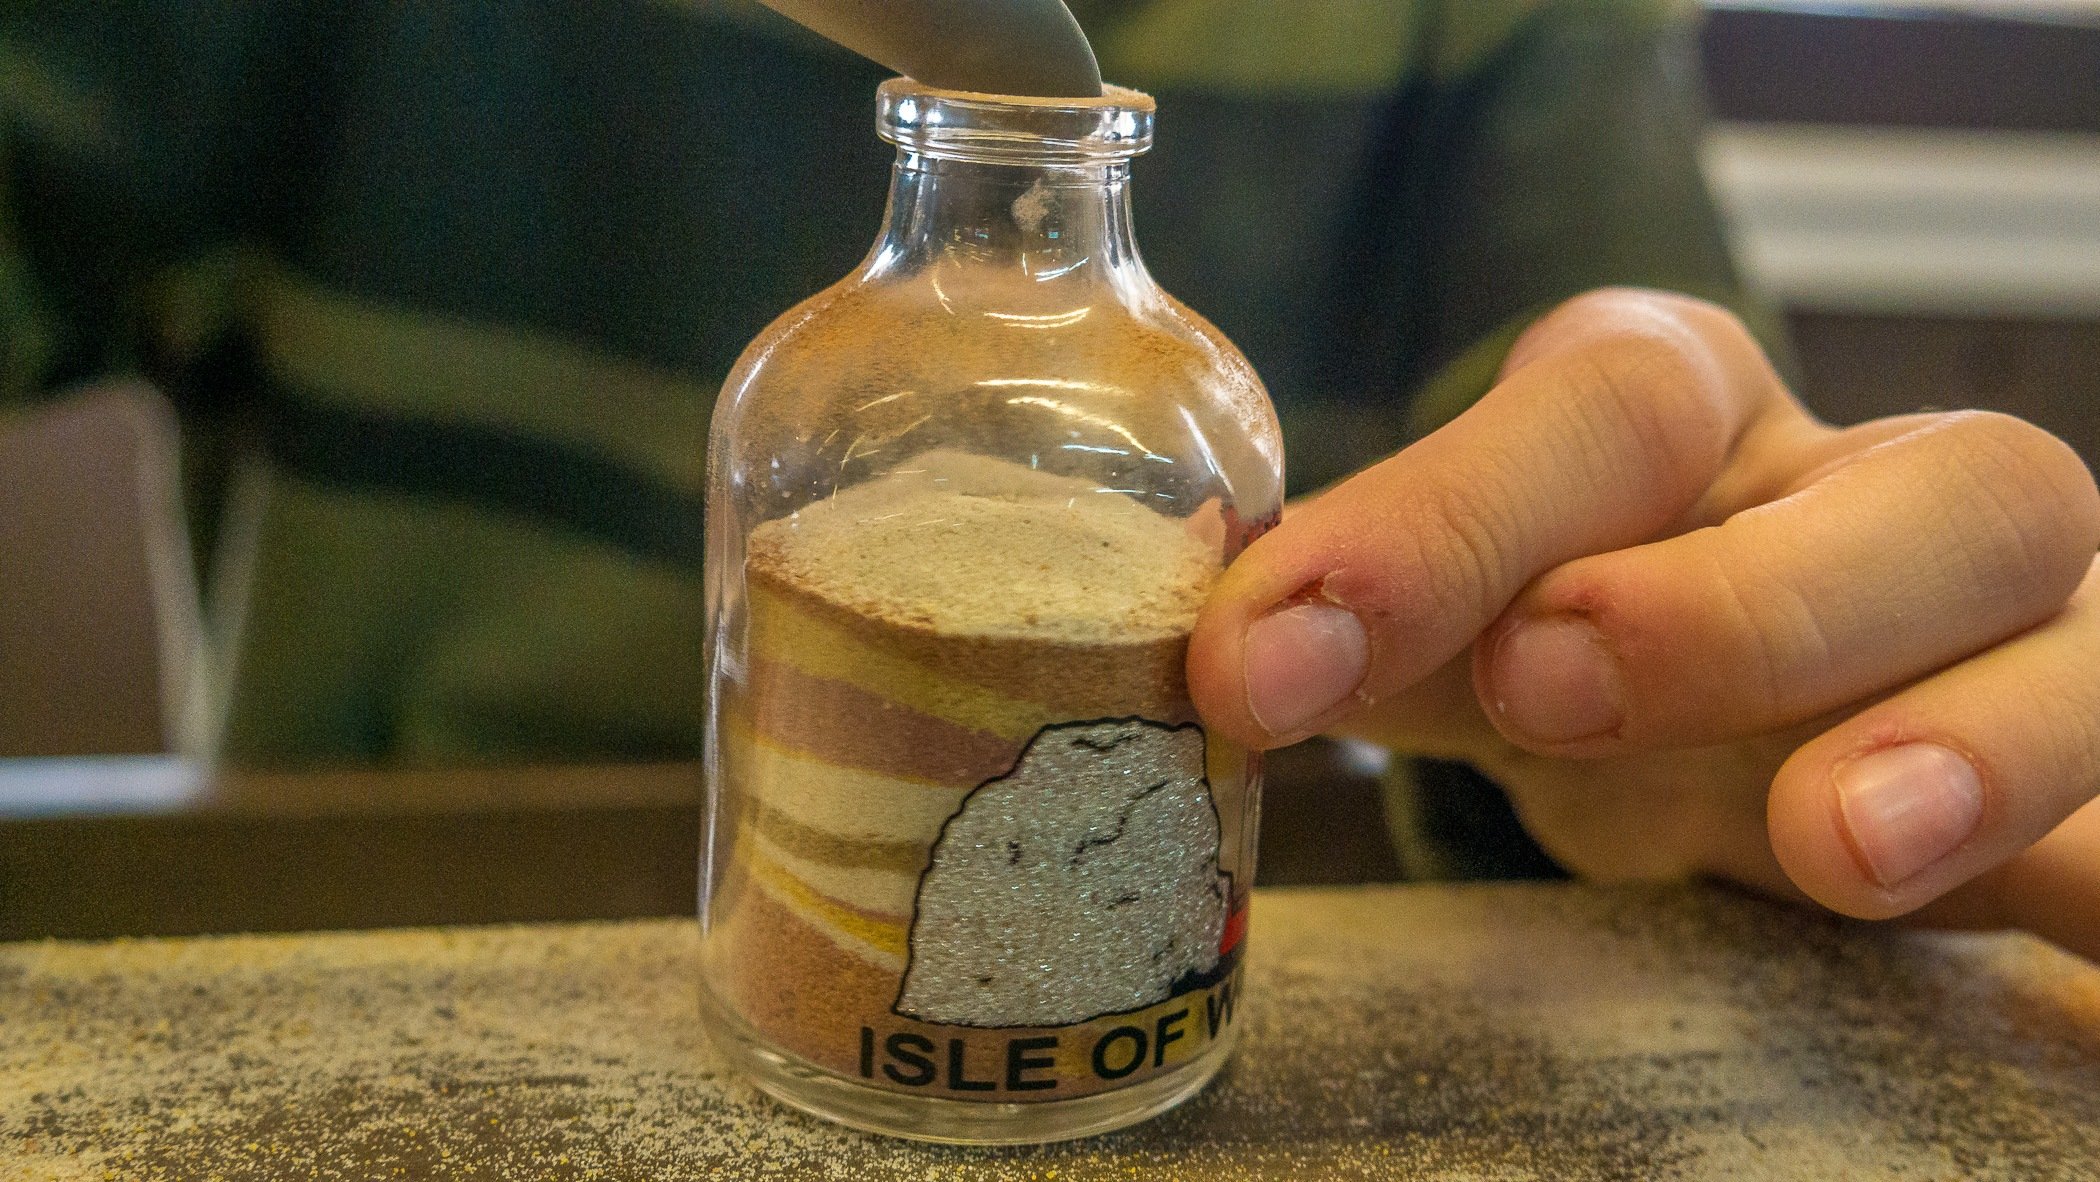  You can make your own layered sand souvenirs.